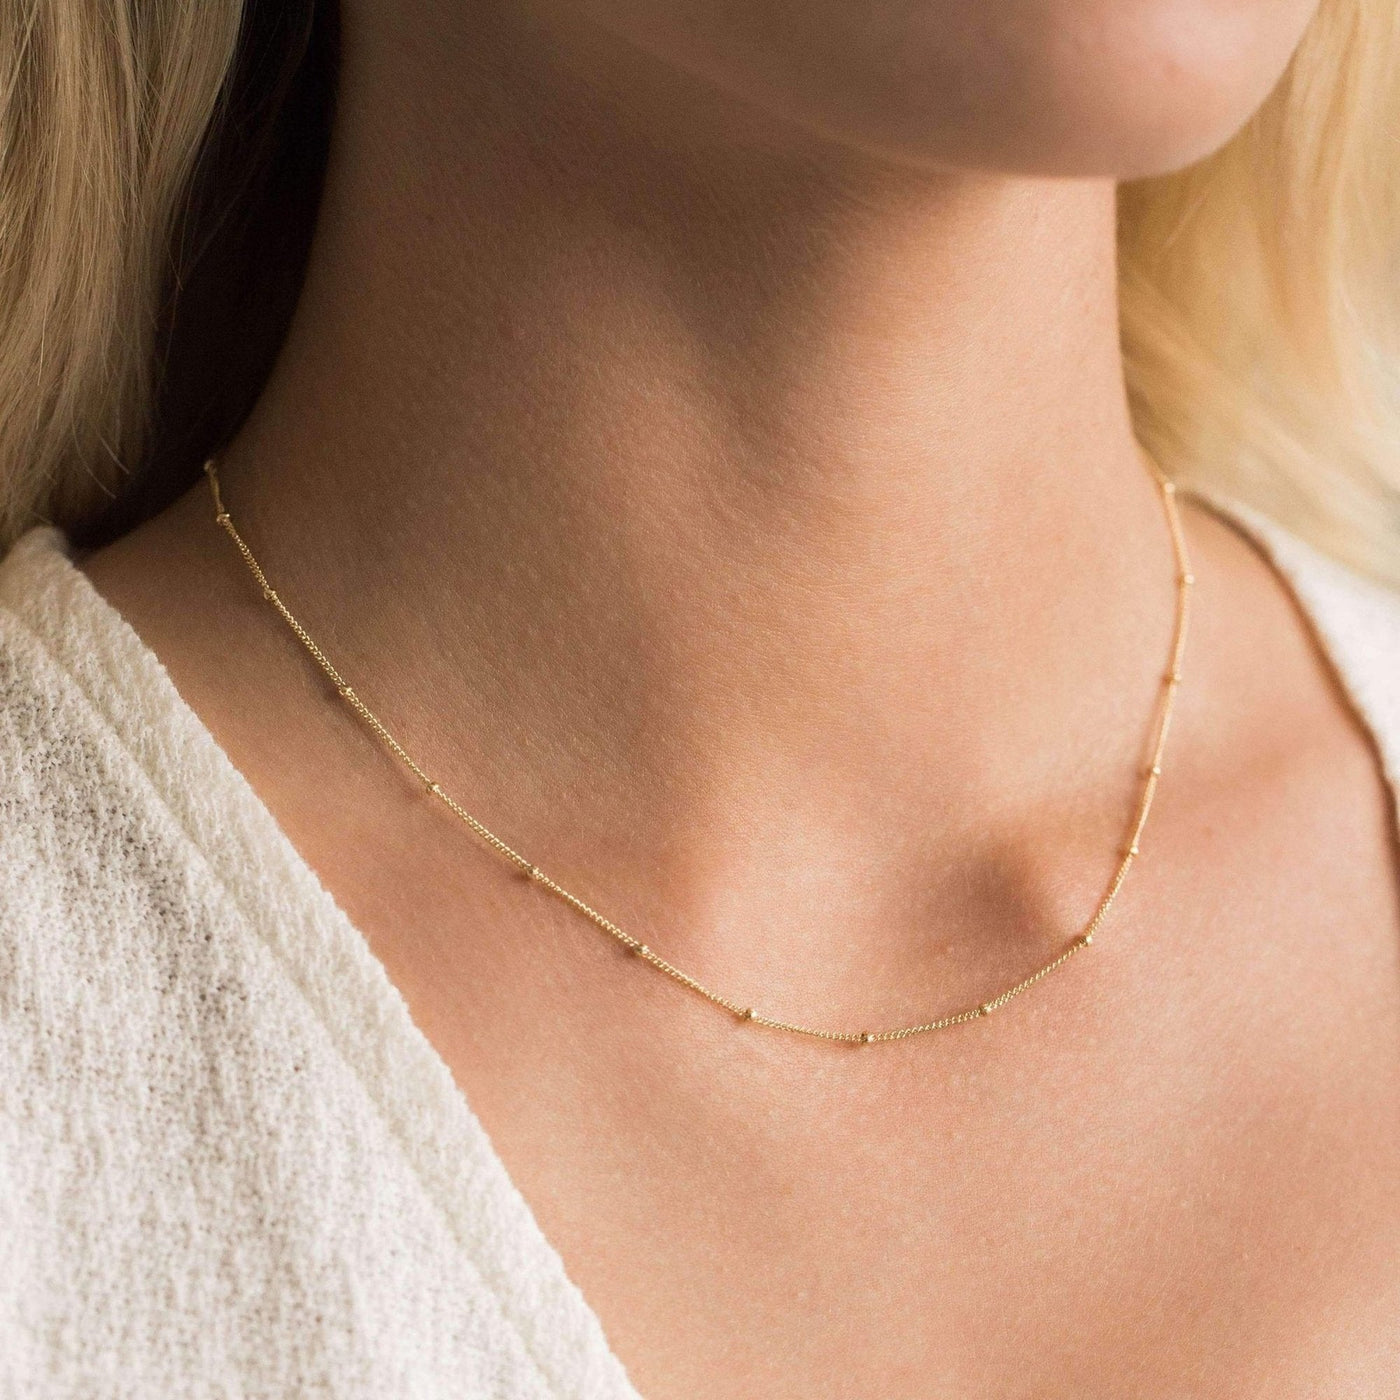 Satellite - Gold filled satellite chain necklace